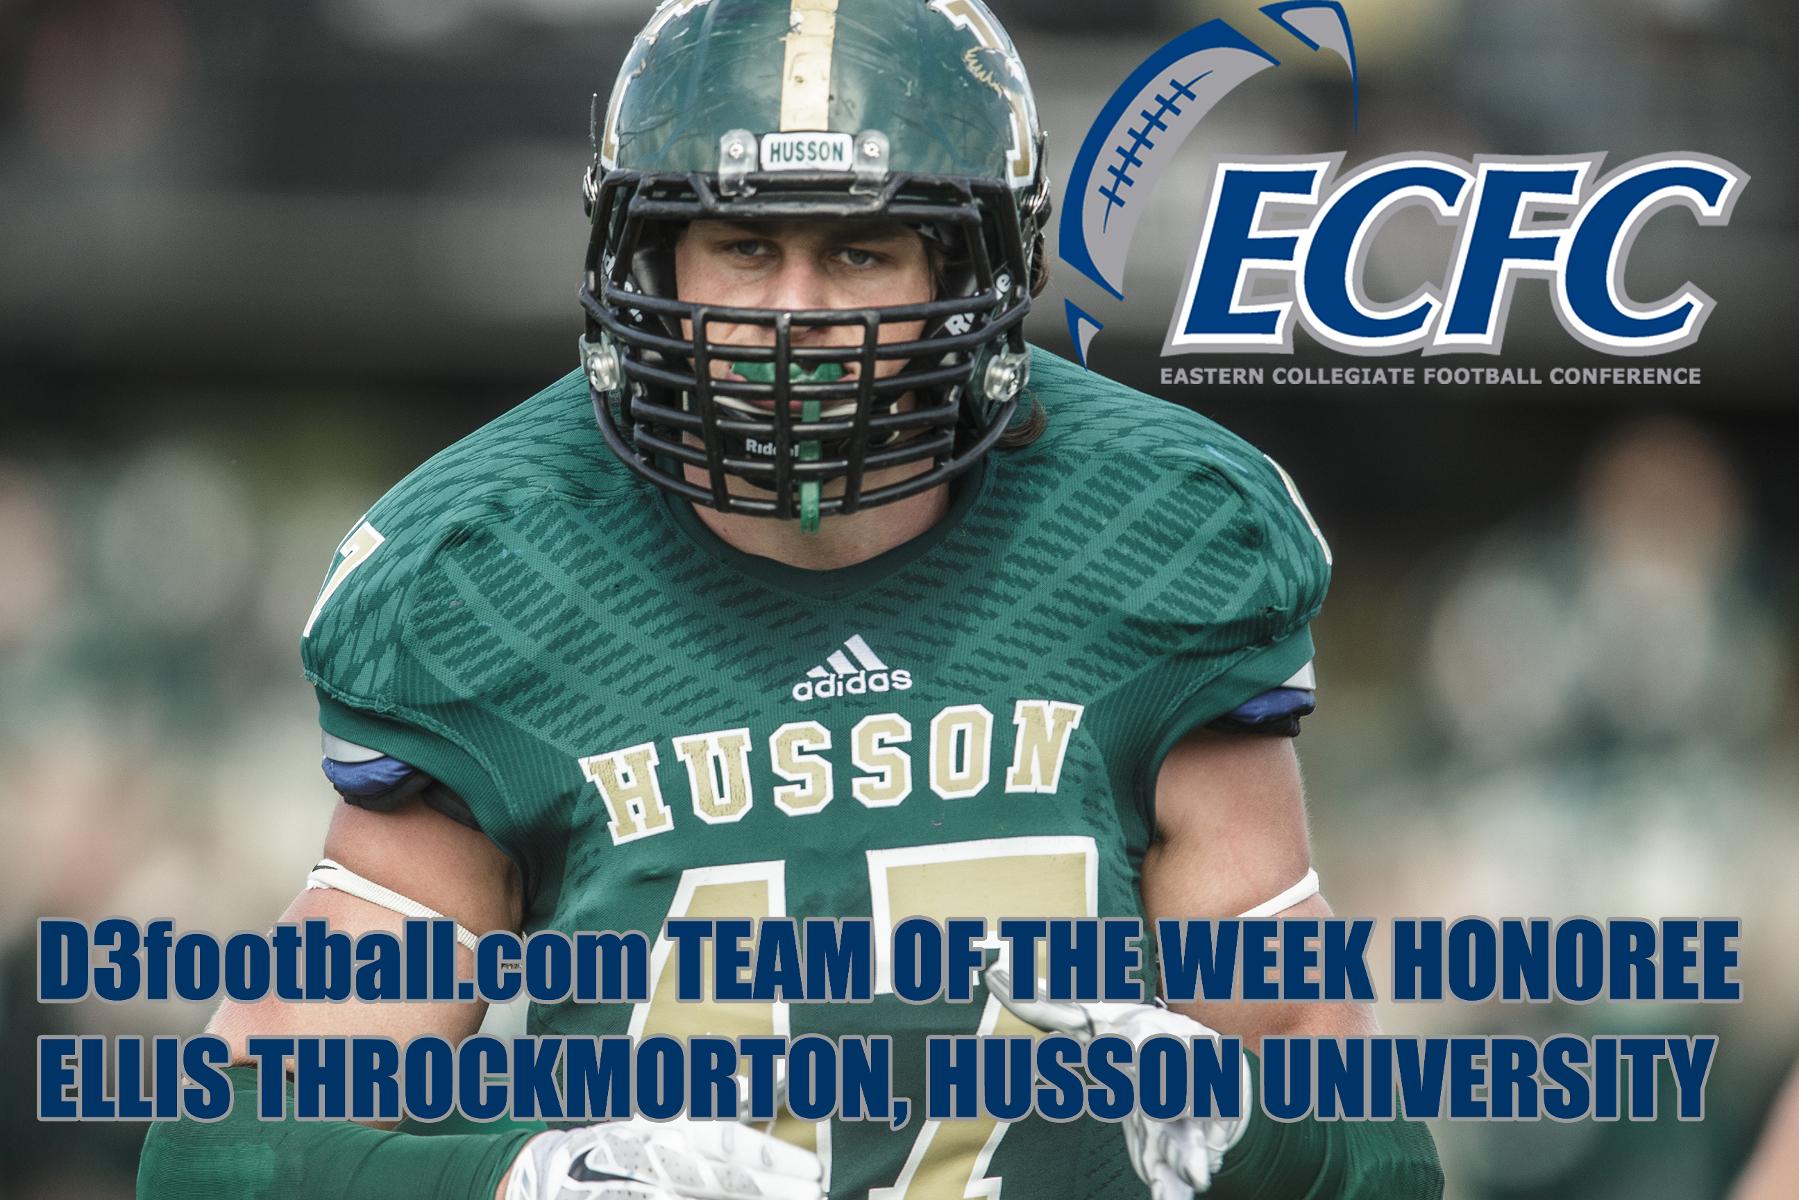 Husson's Throckmorton Selected to D3football.com Team of the Week